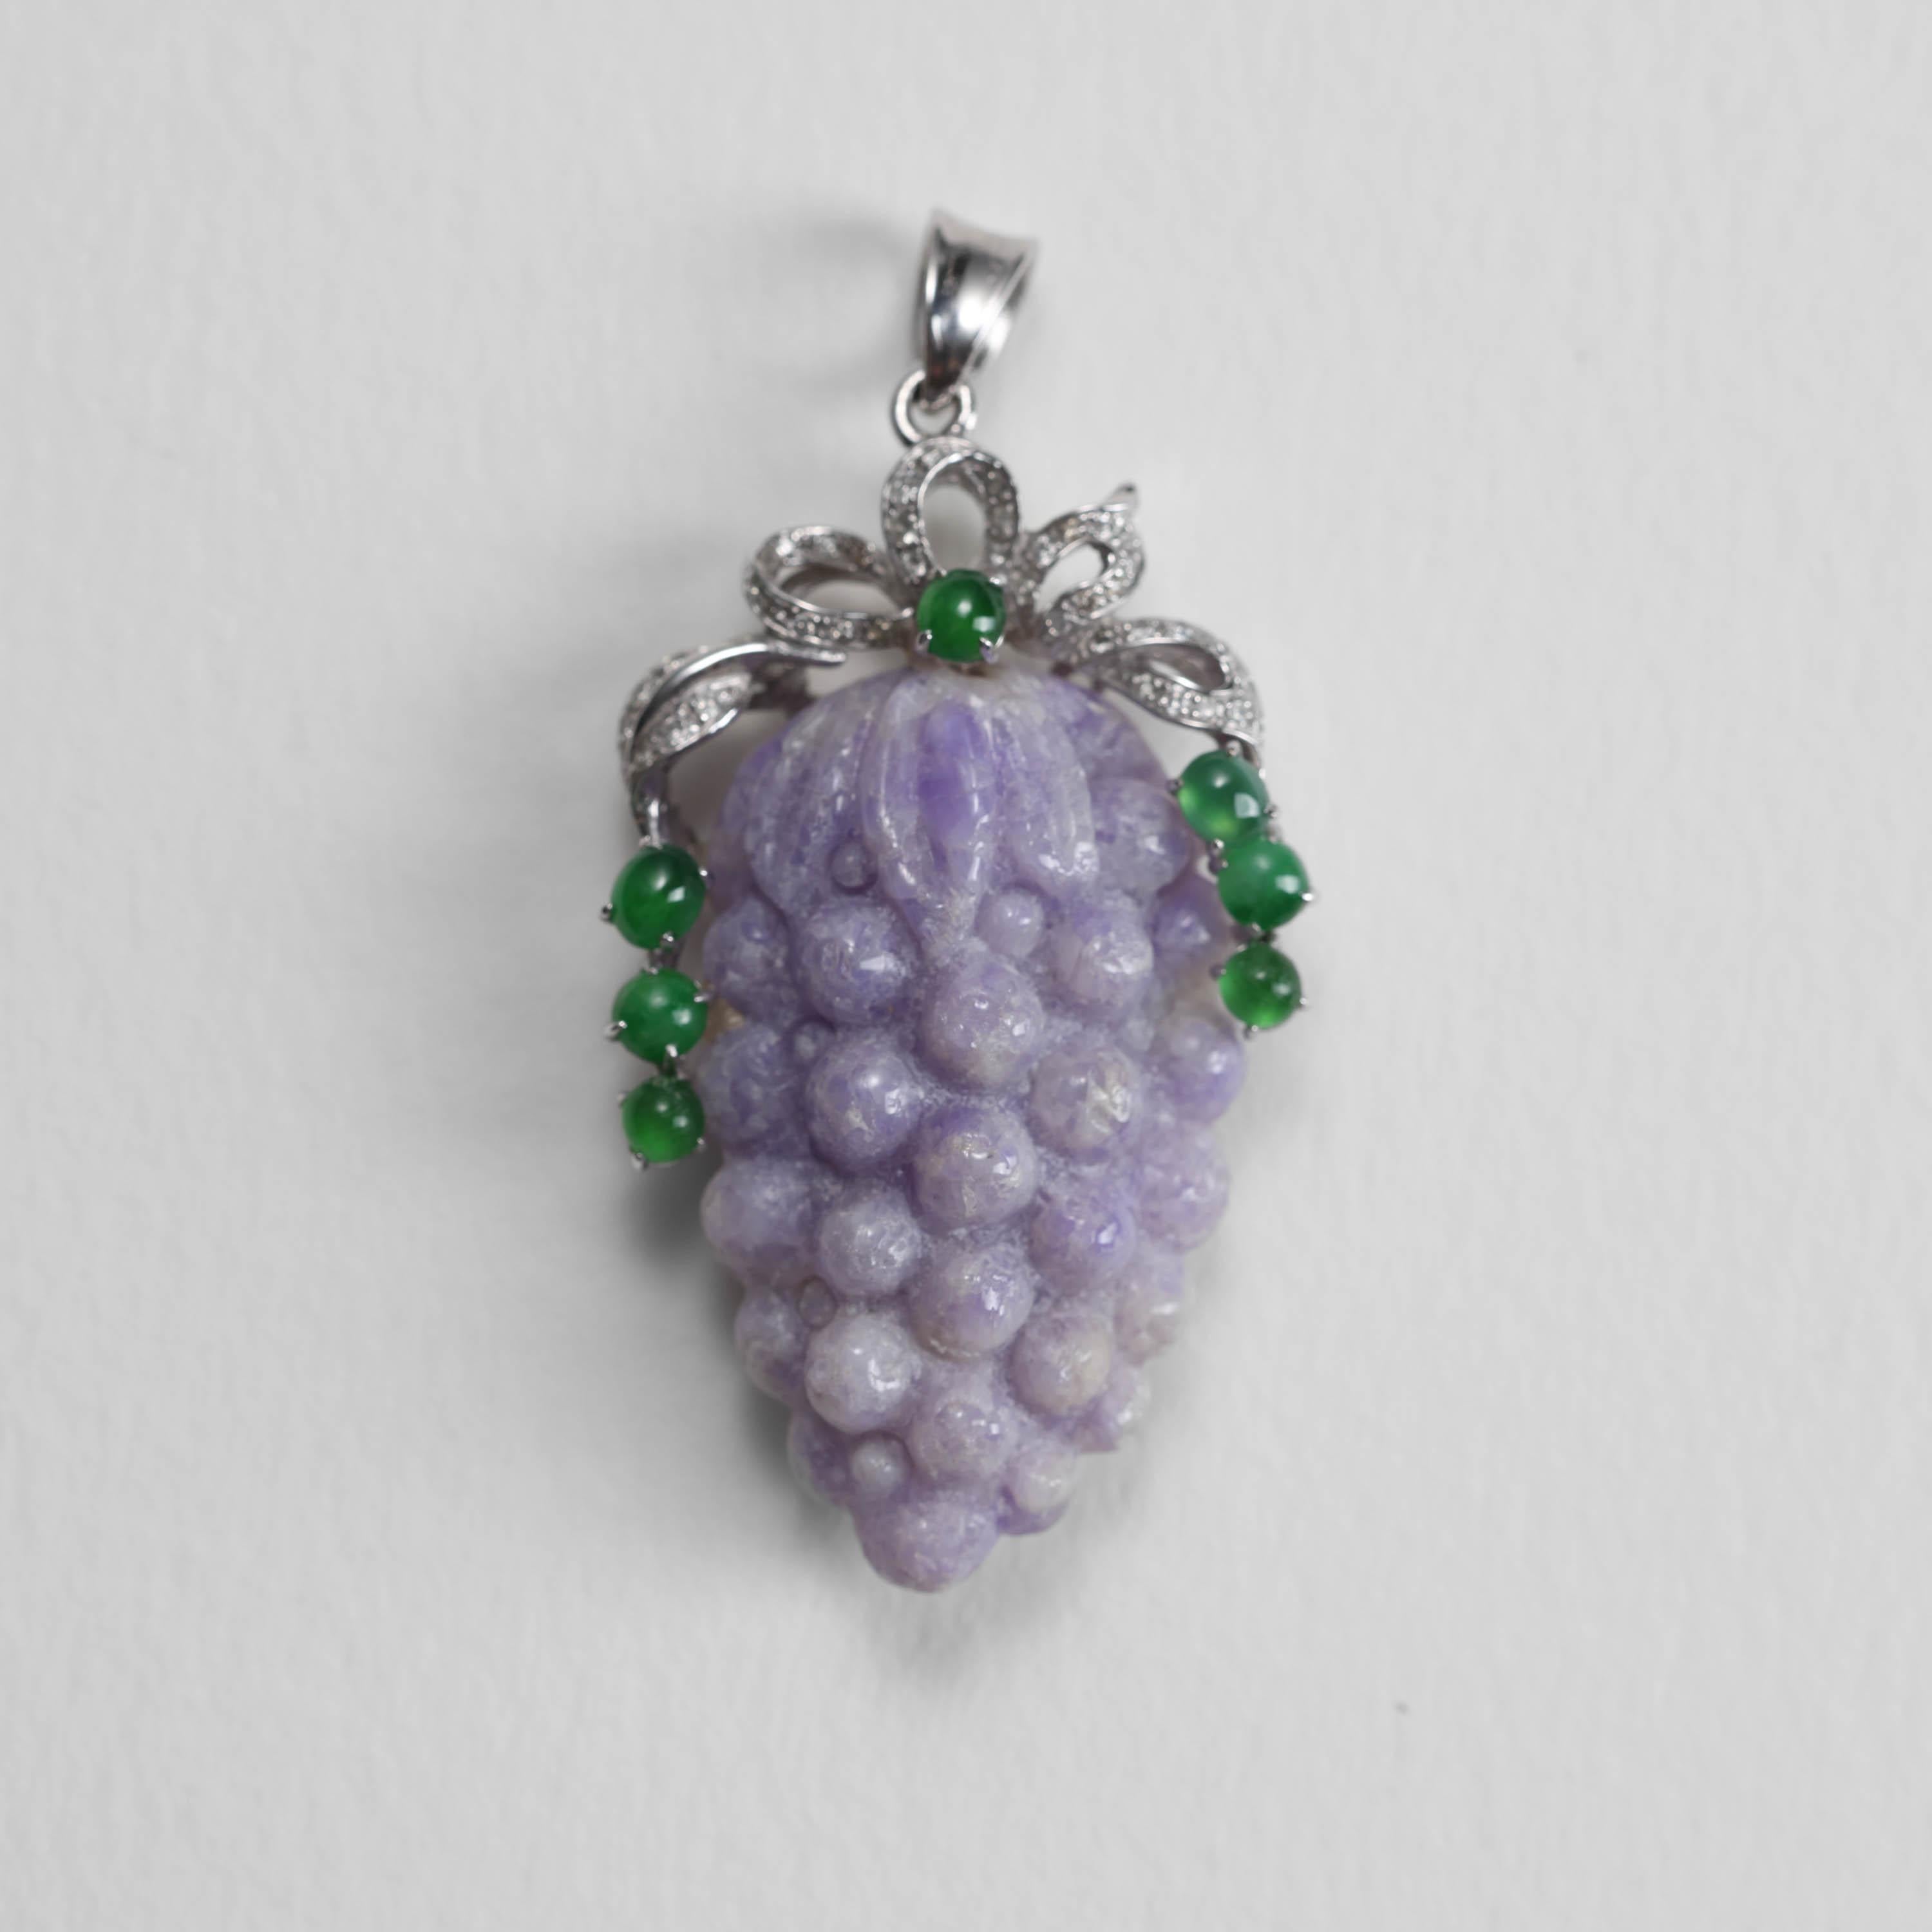 This hand-carved lavender jade pendant is a gorgeous and unusual piece, most likely created in the middle of the previous century (Circa 1950s;1960s). Even though it is opaque like most lavender jade, I photographed it in very low light so that you